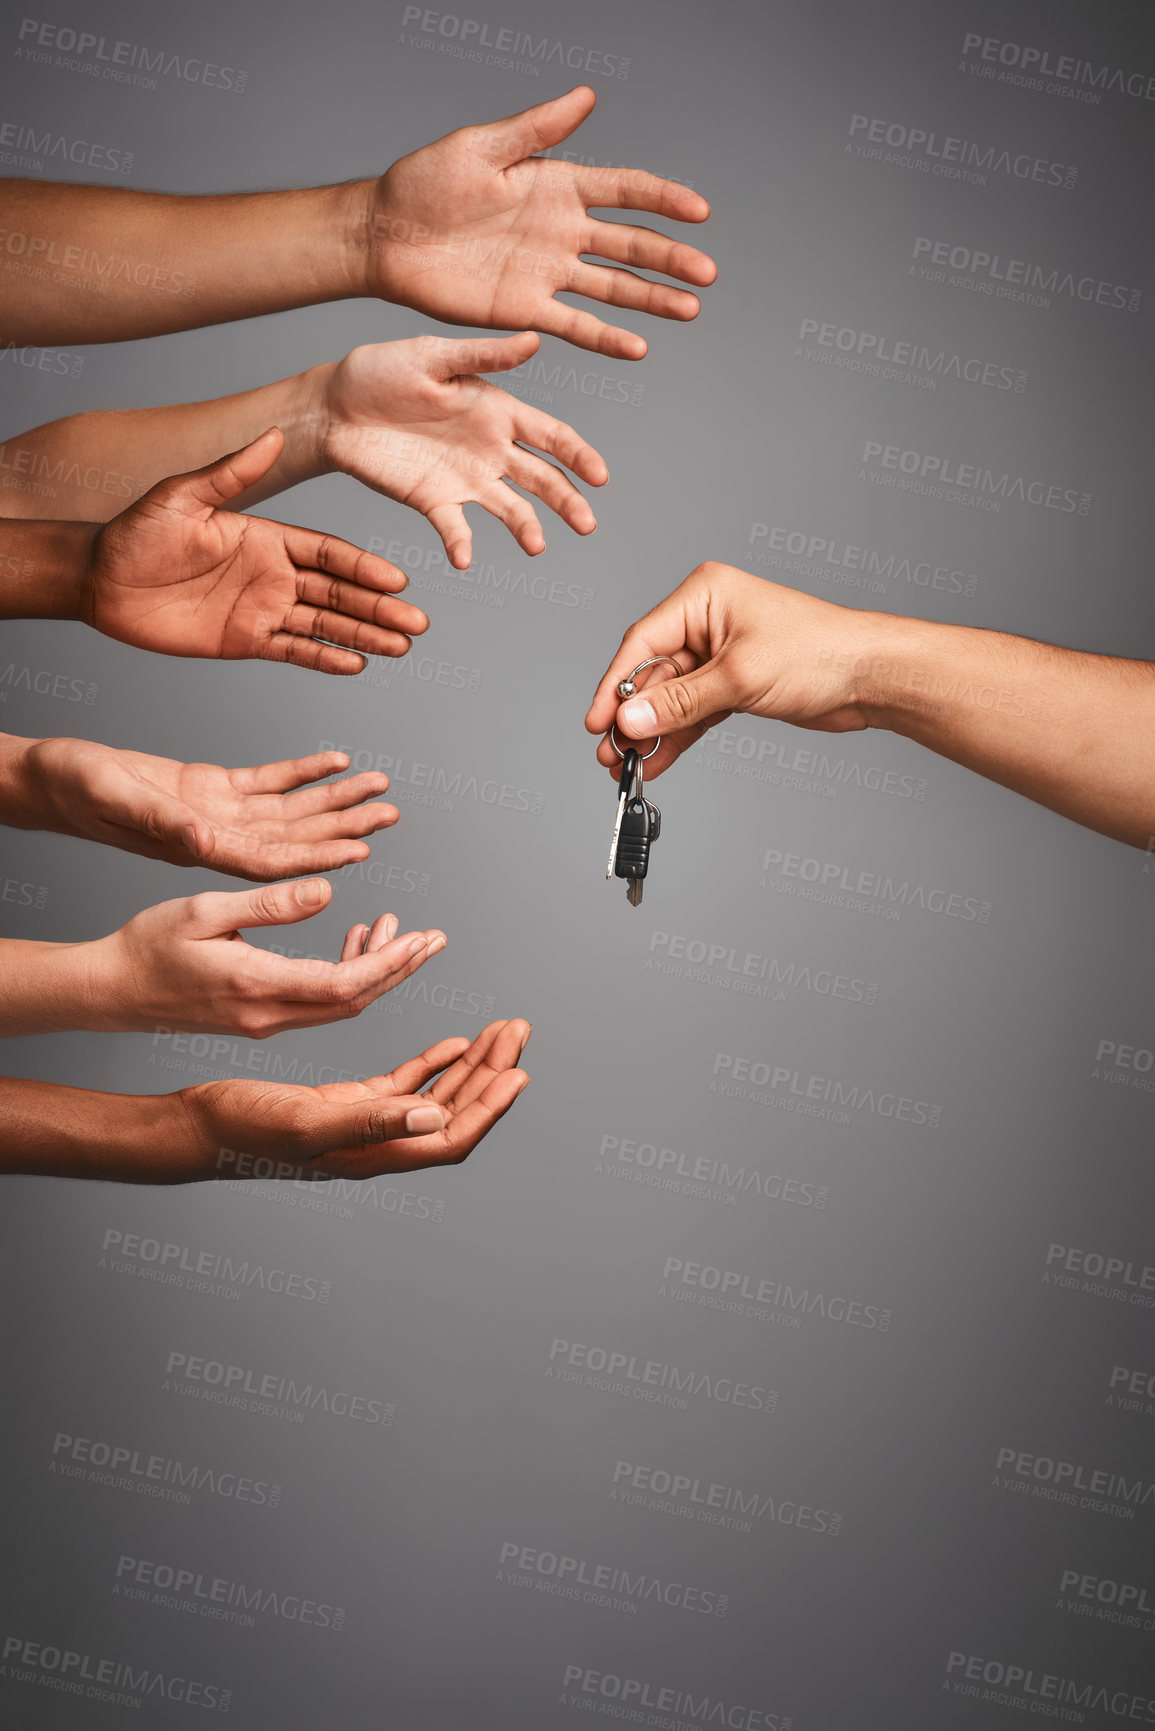 Buy stock photo Studio shot of unidentifiable hands reaching for a set of keys against a gray background